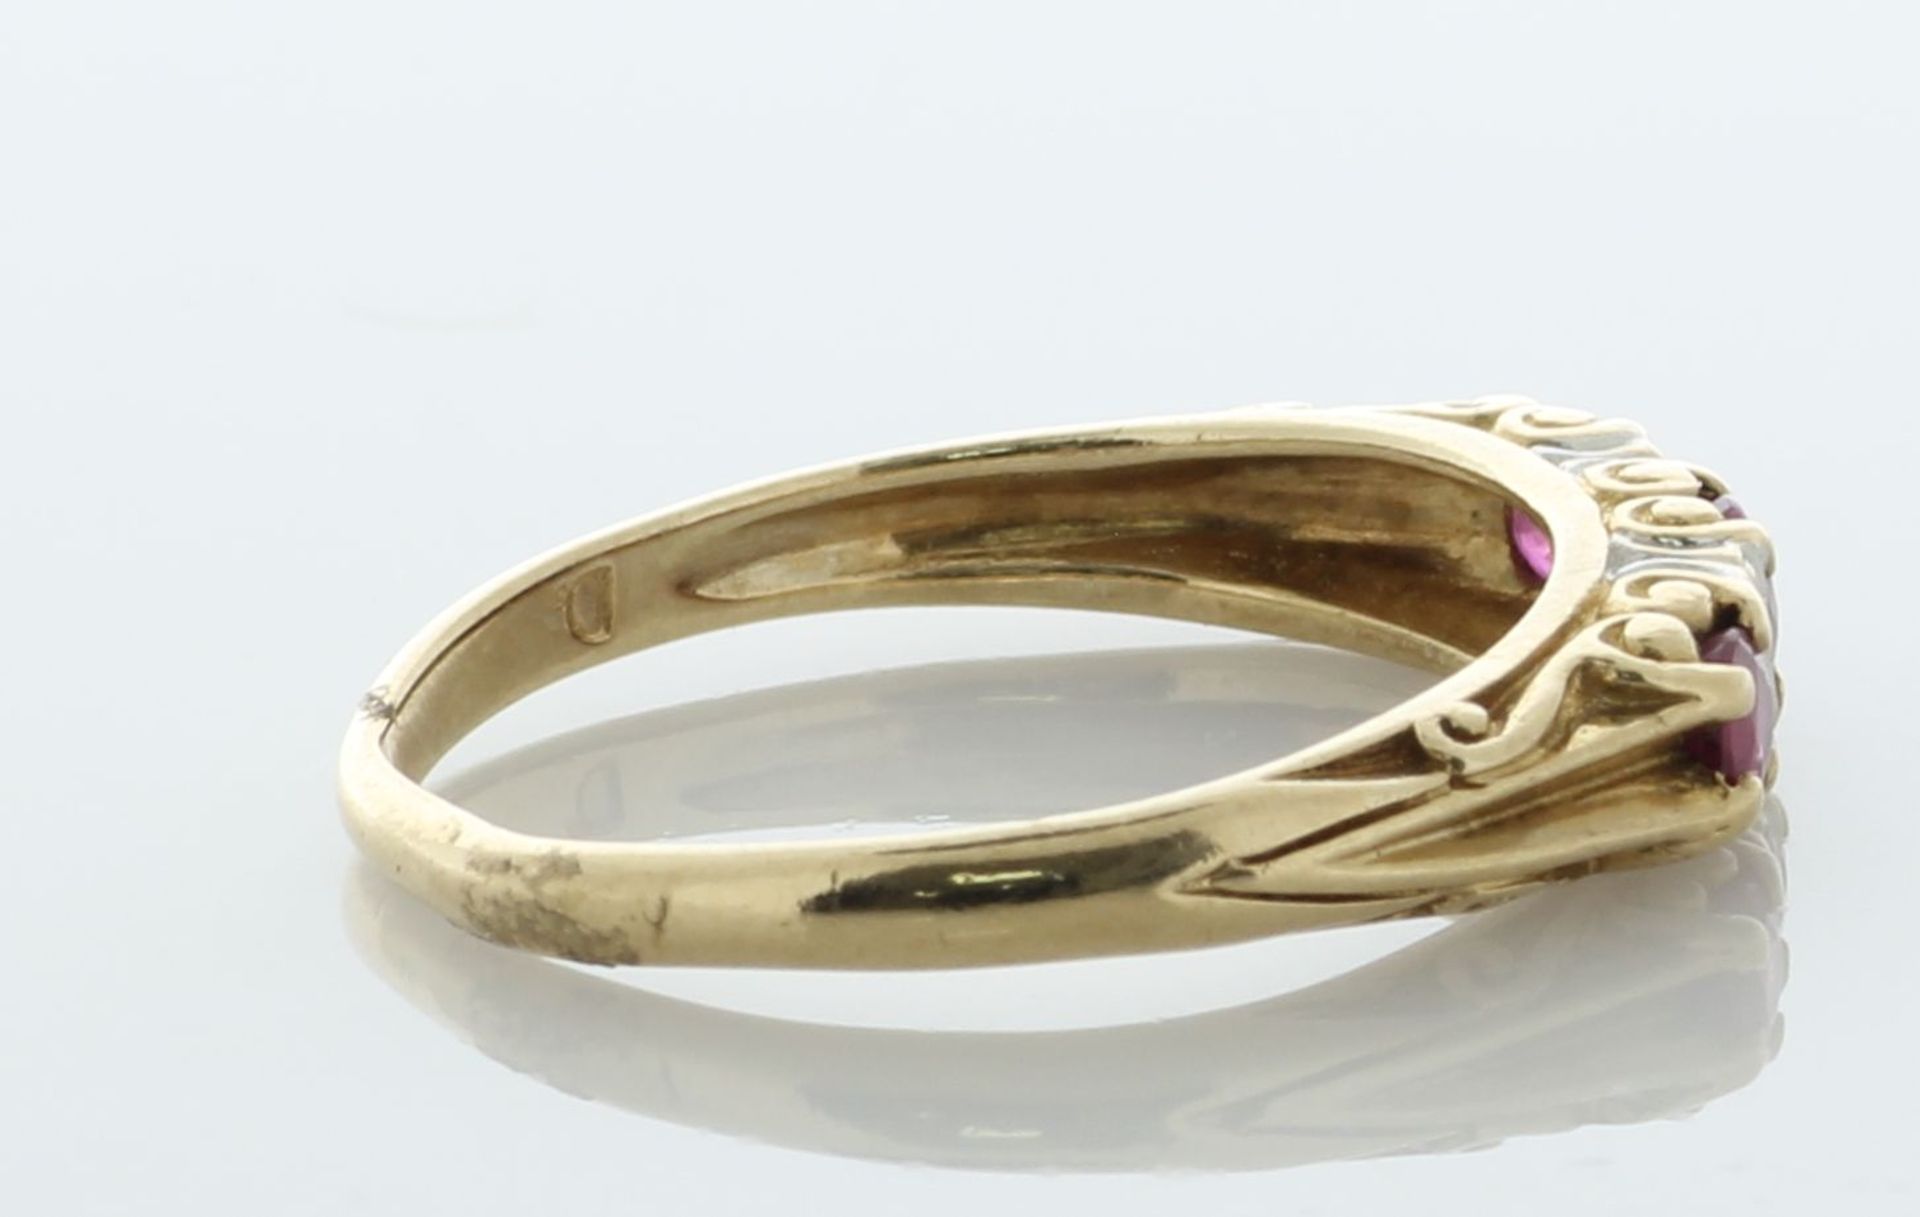 9ct Yellow Gold And White Gold Diamond And Ruby Ring (R 0.30) 0.05 Carats - Valued By AGI £815. - Image 3 of 6